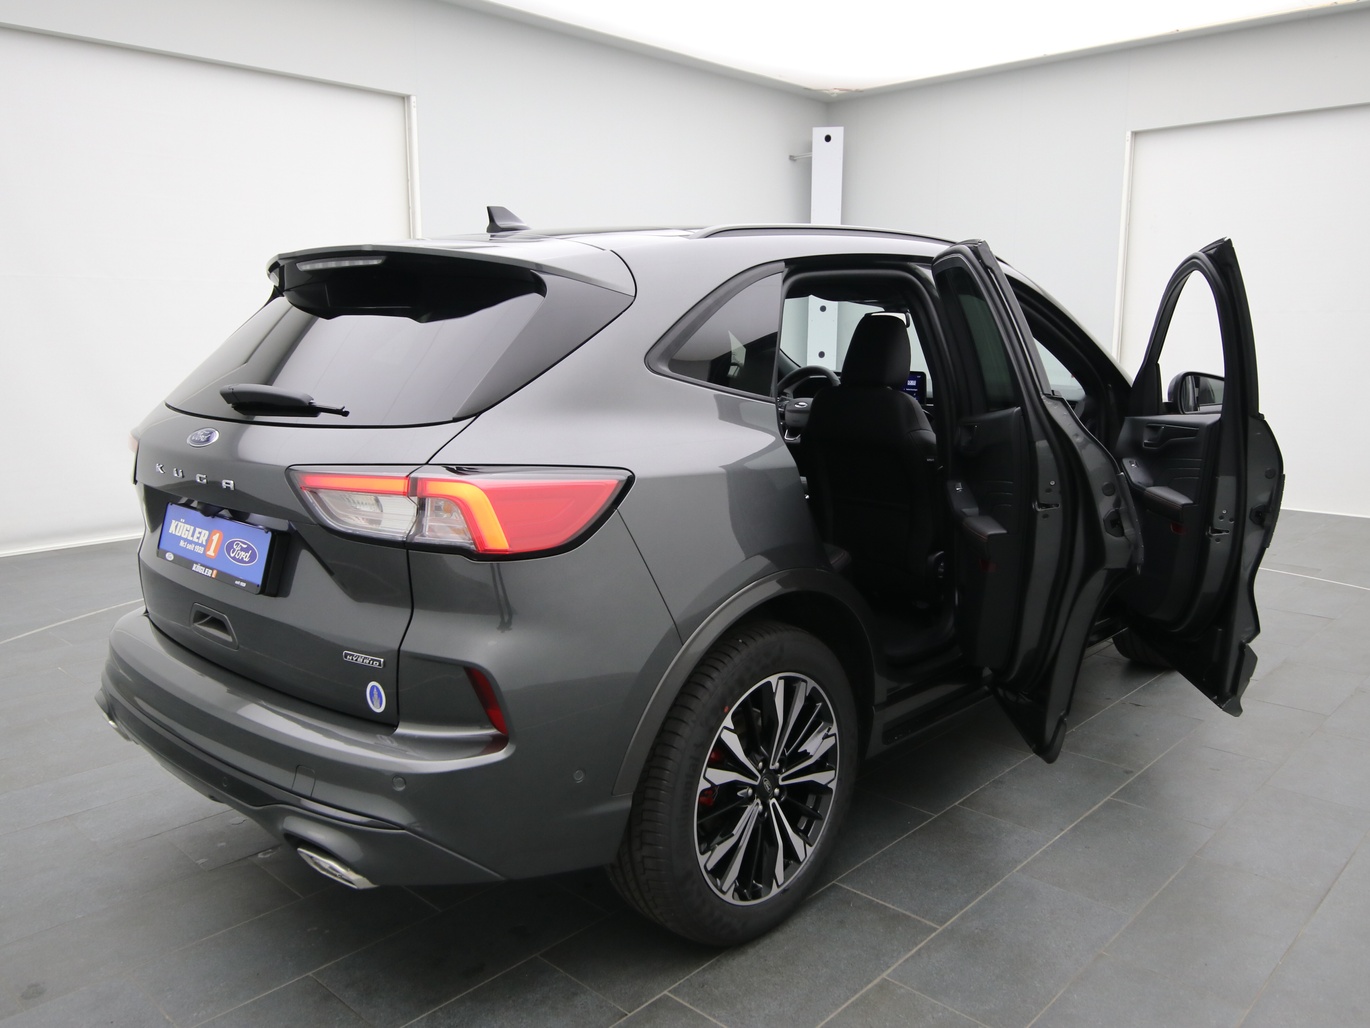  Ford Kuga ST-Line X 225PS Plug-in-Hybrid Aut. in Magnetic Grau 